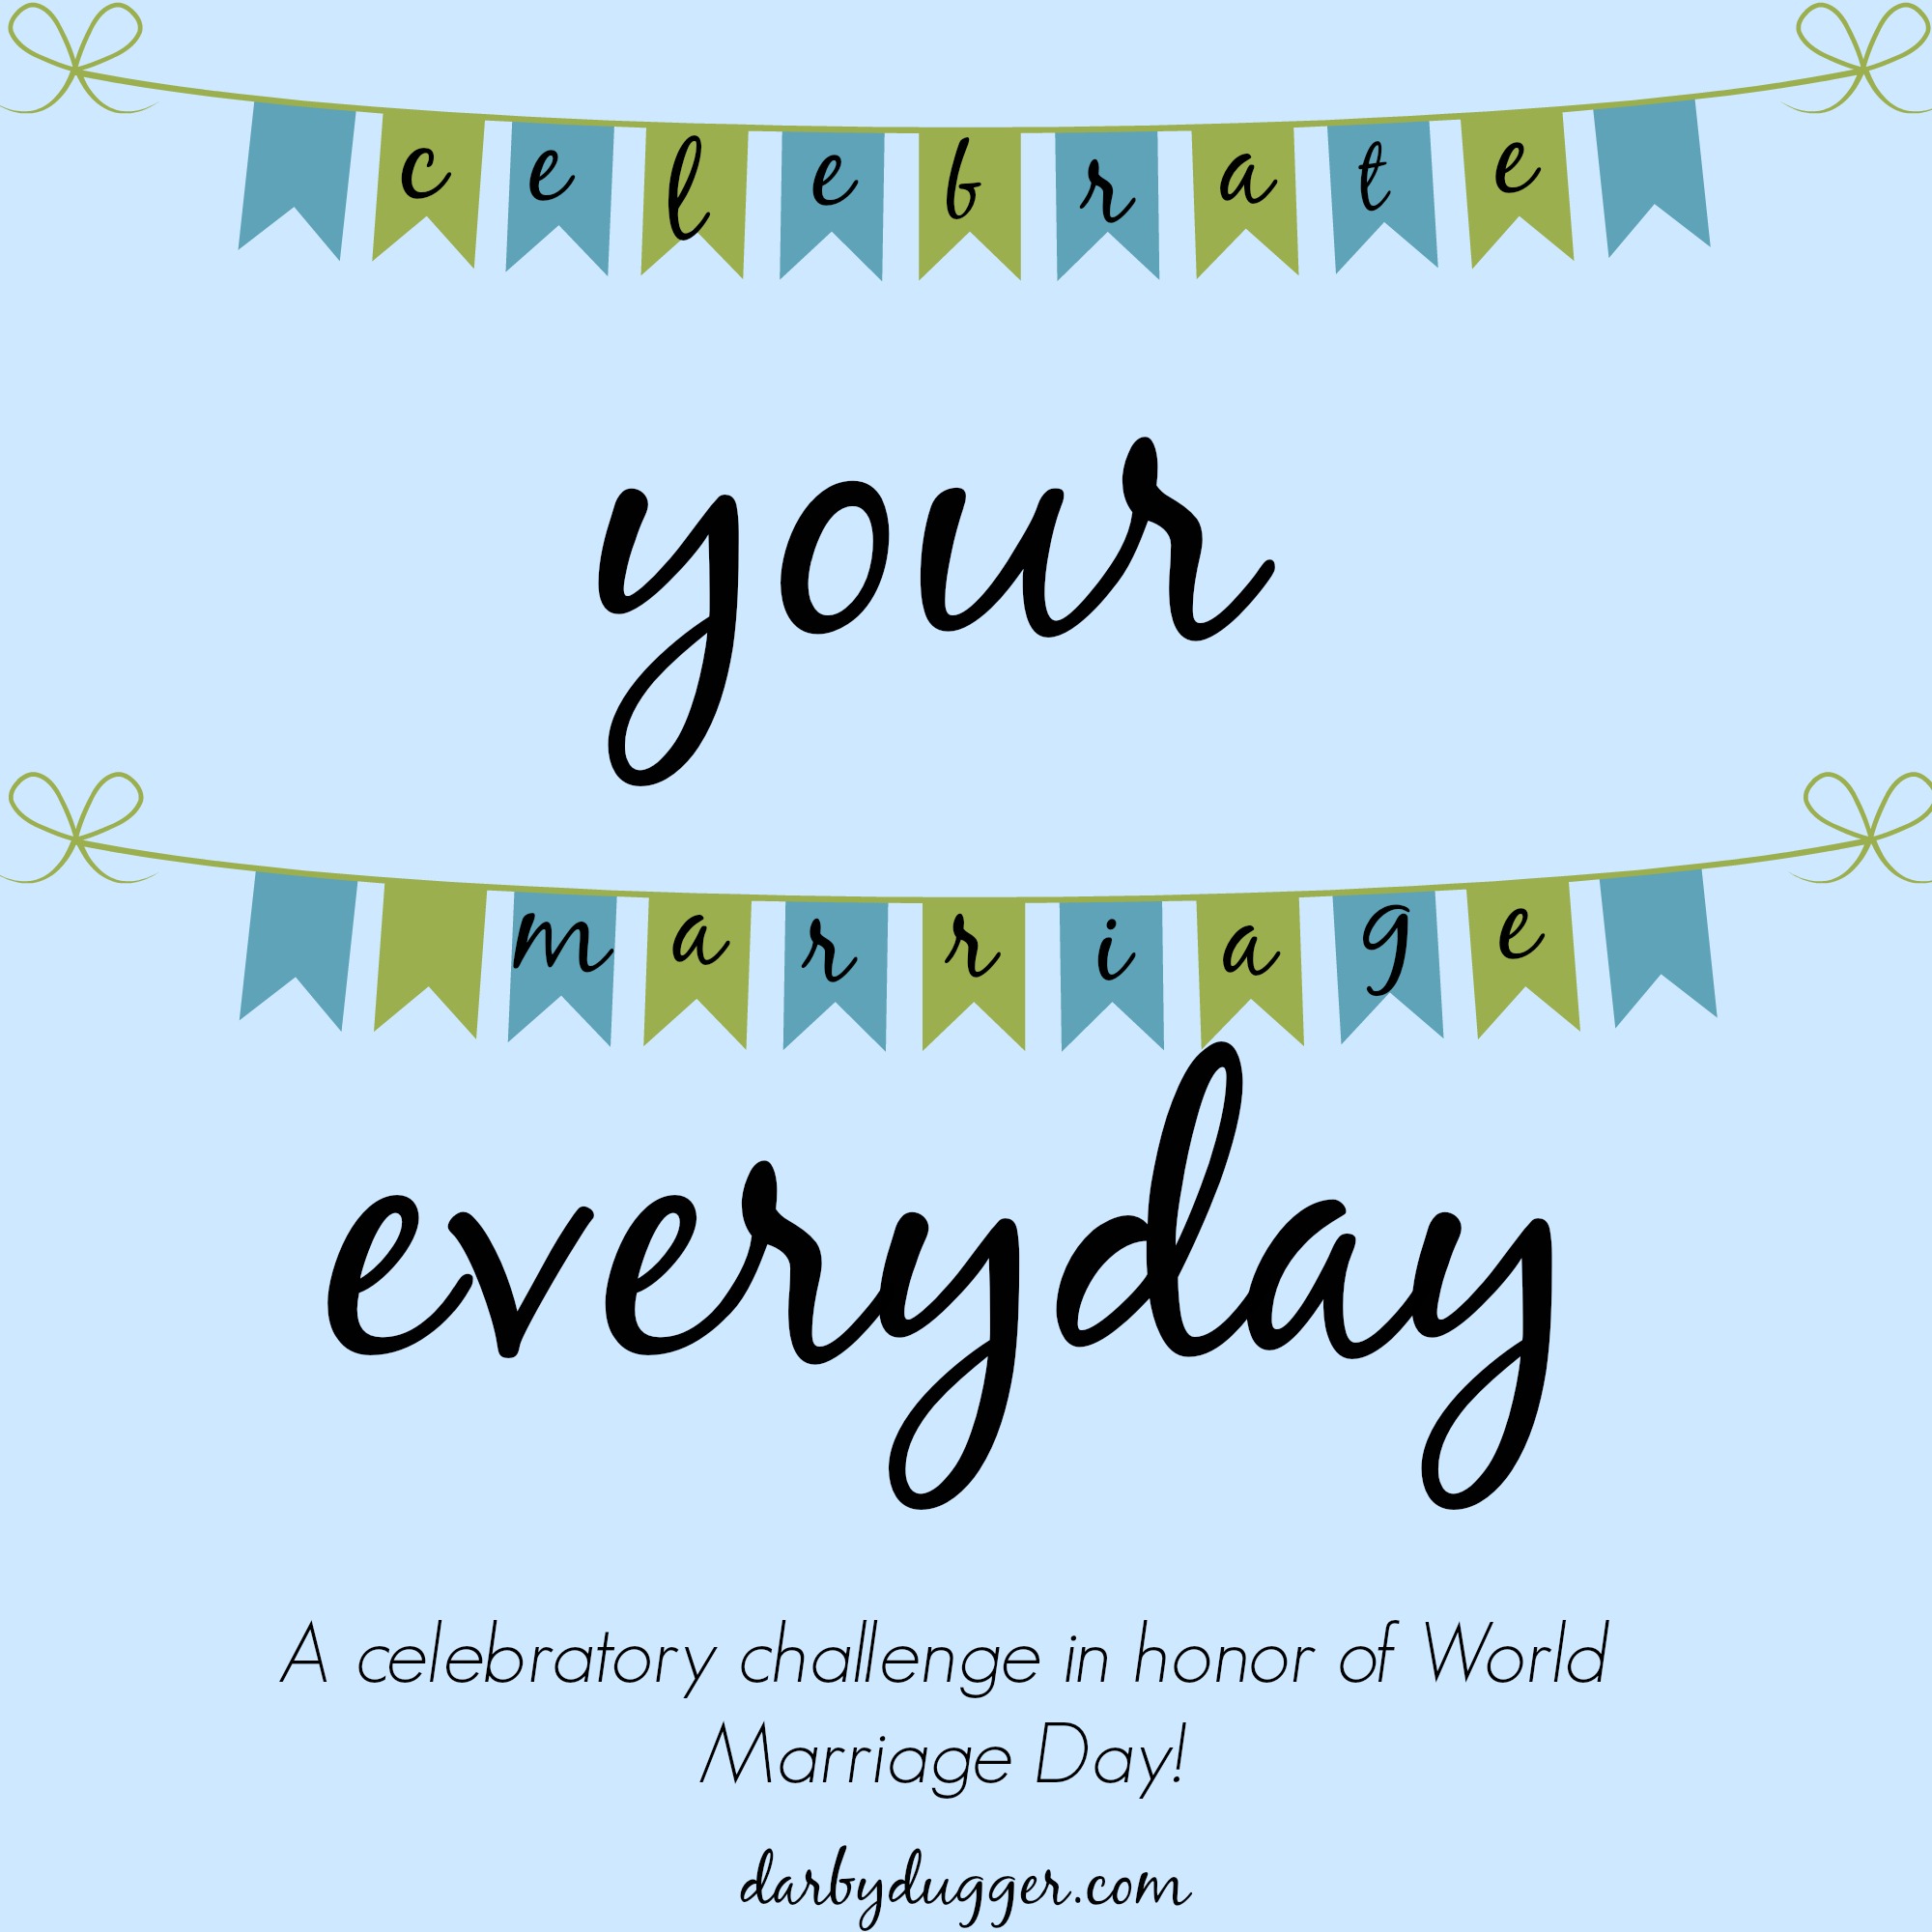 celebrate your marriage every day — Darby Dugger